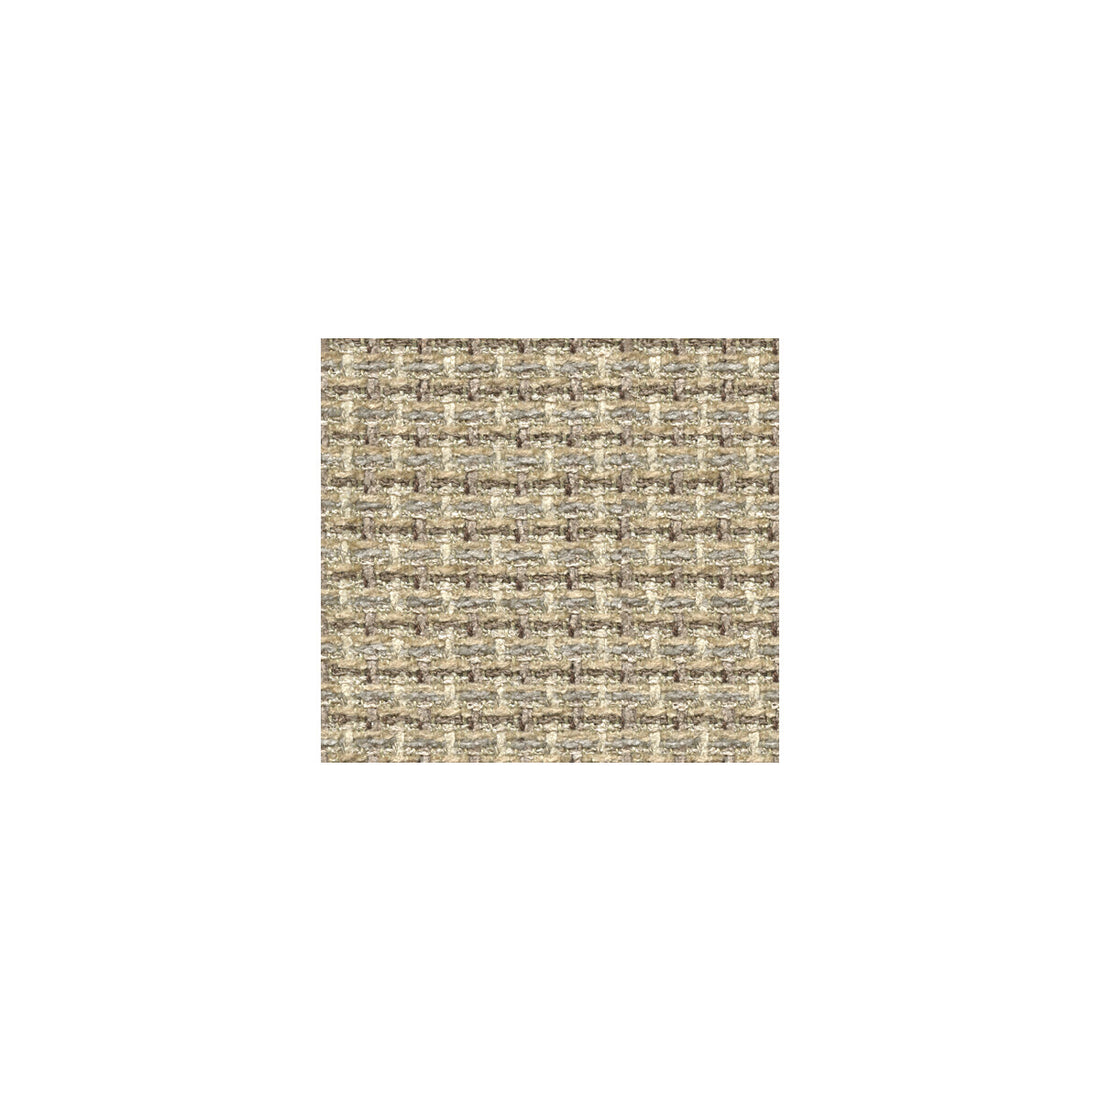 Nothing Missing fabric in putty color - pattern 30539.16.0 - by Kravet Couture